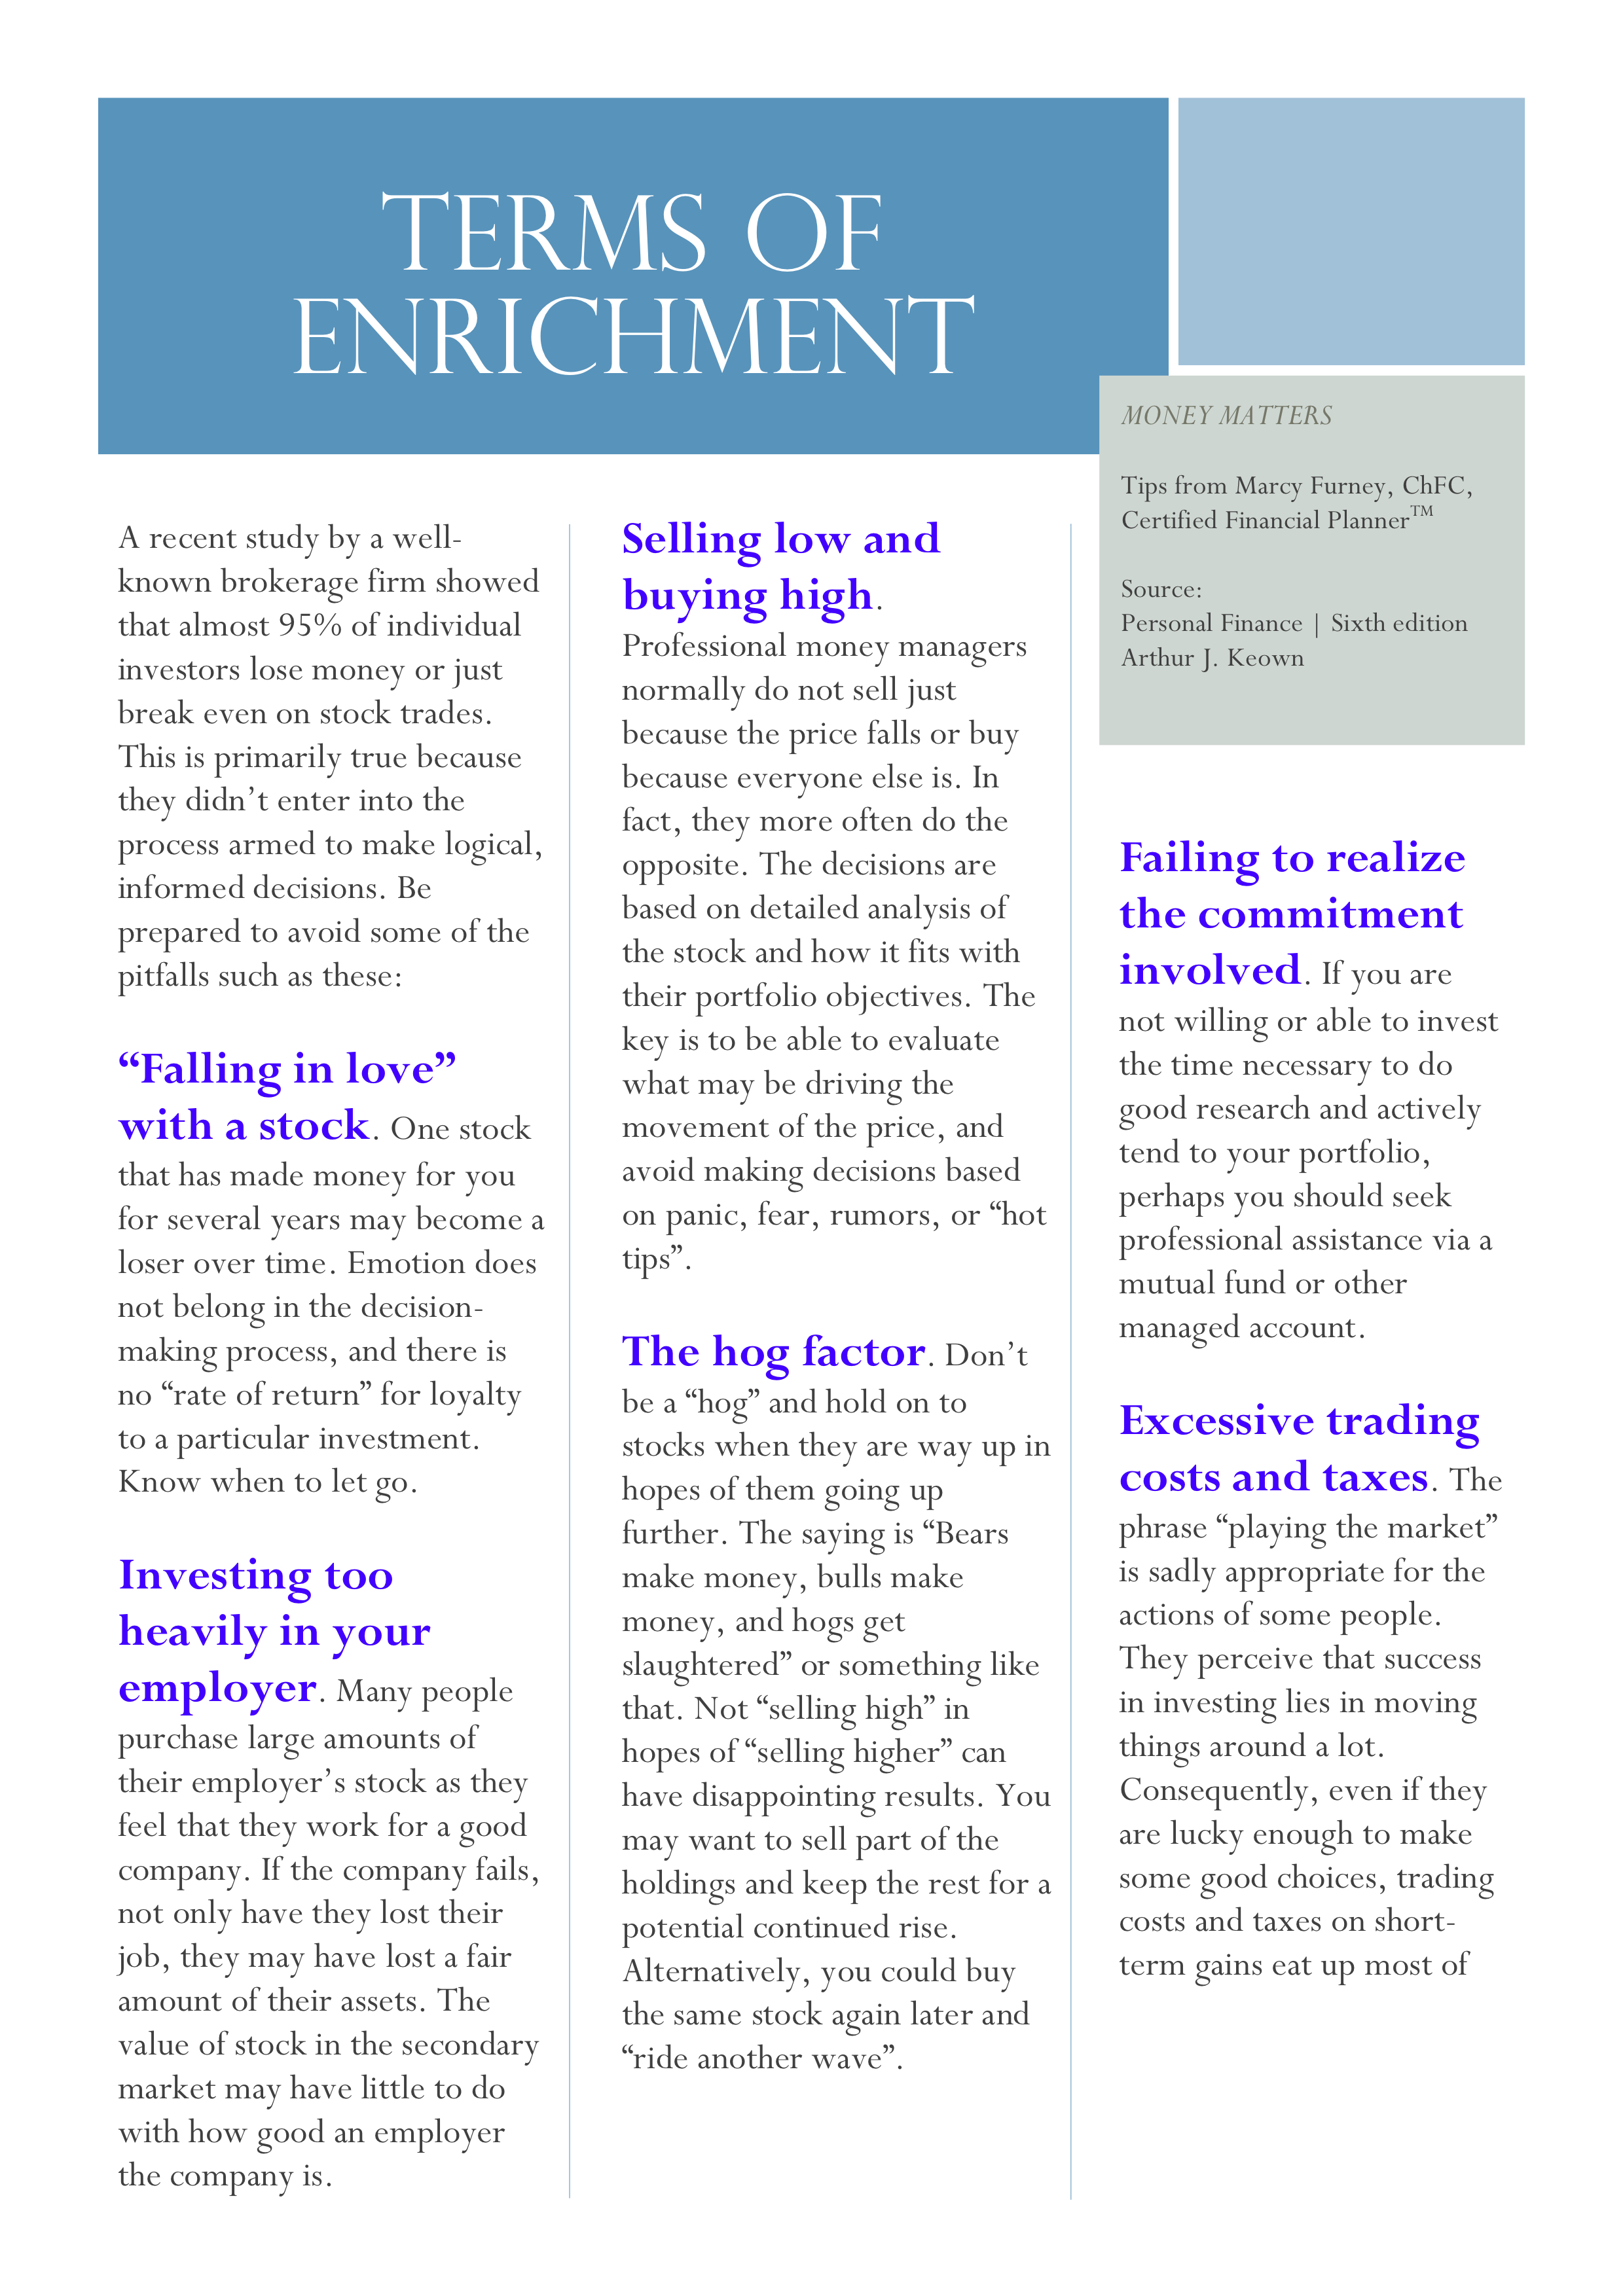 Terms of Enrichment